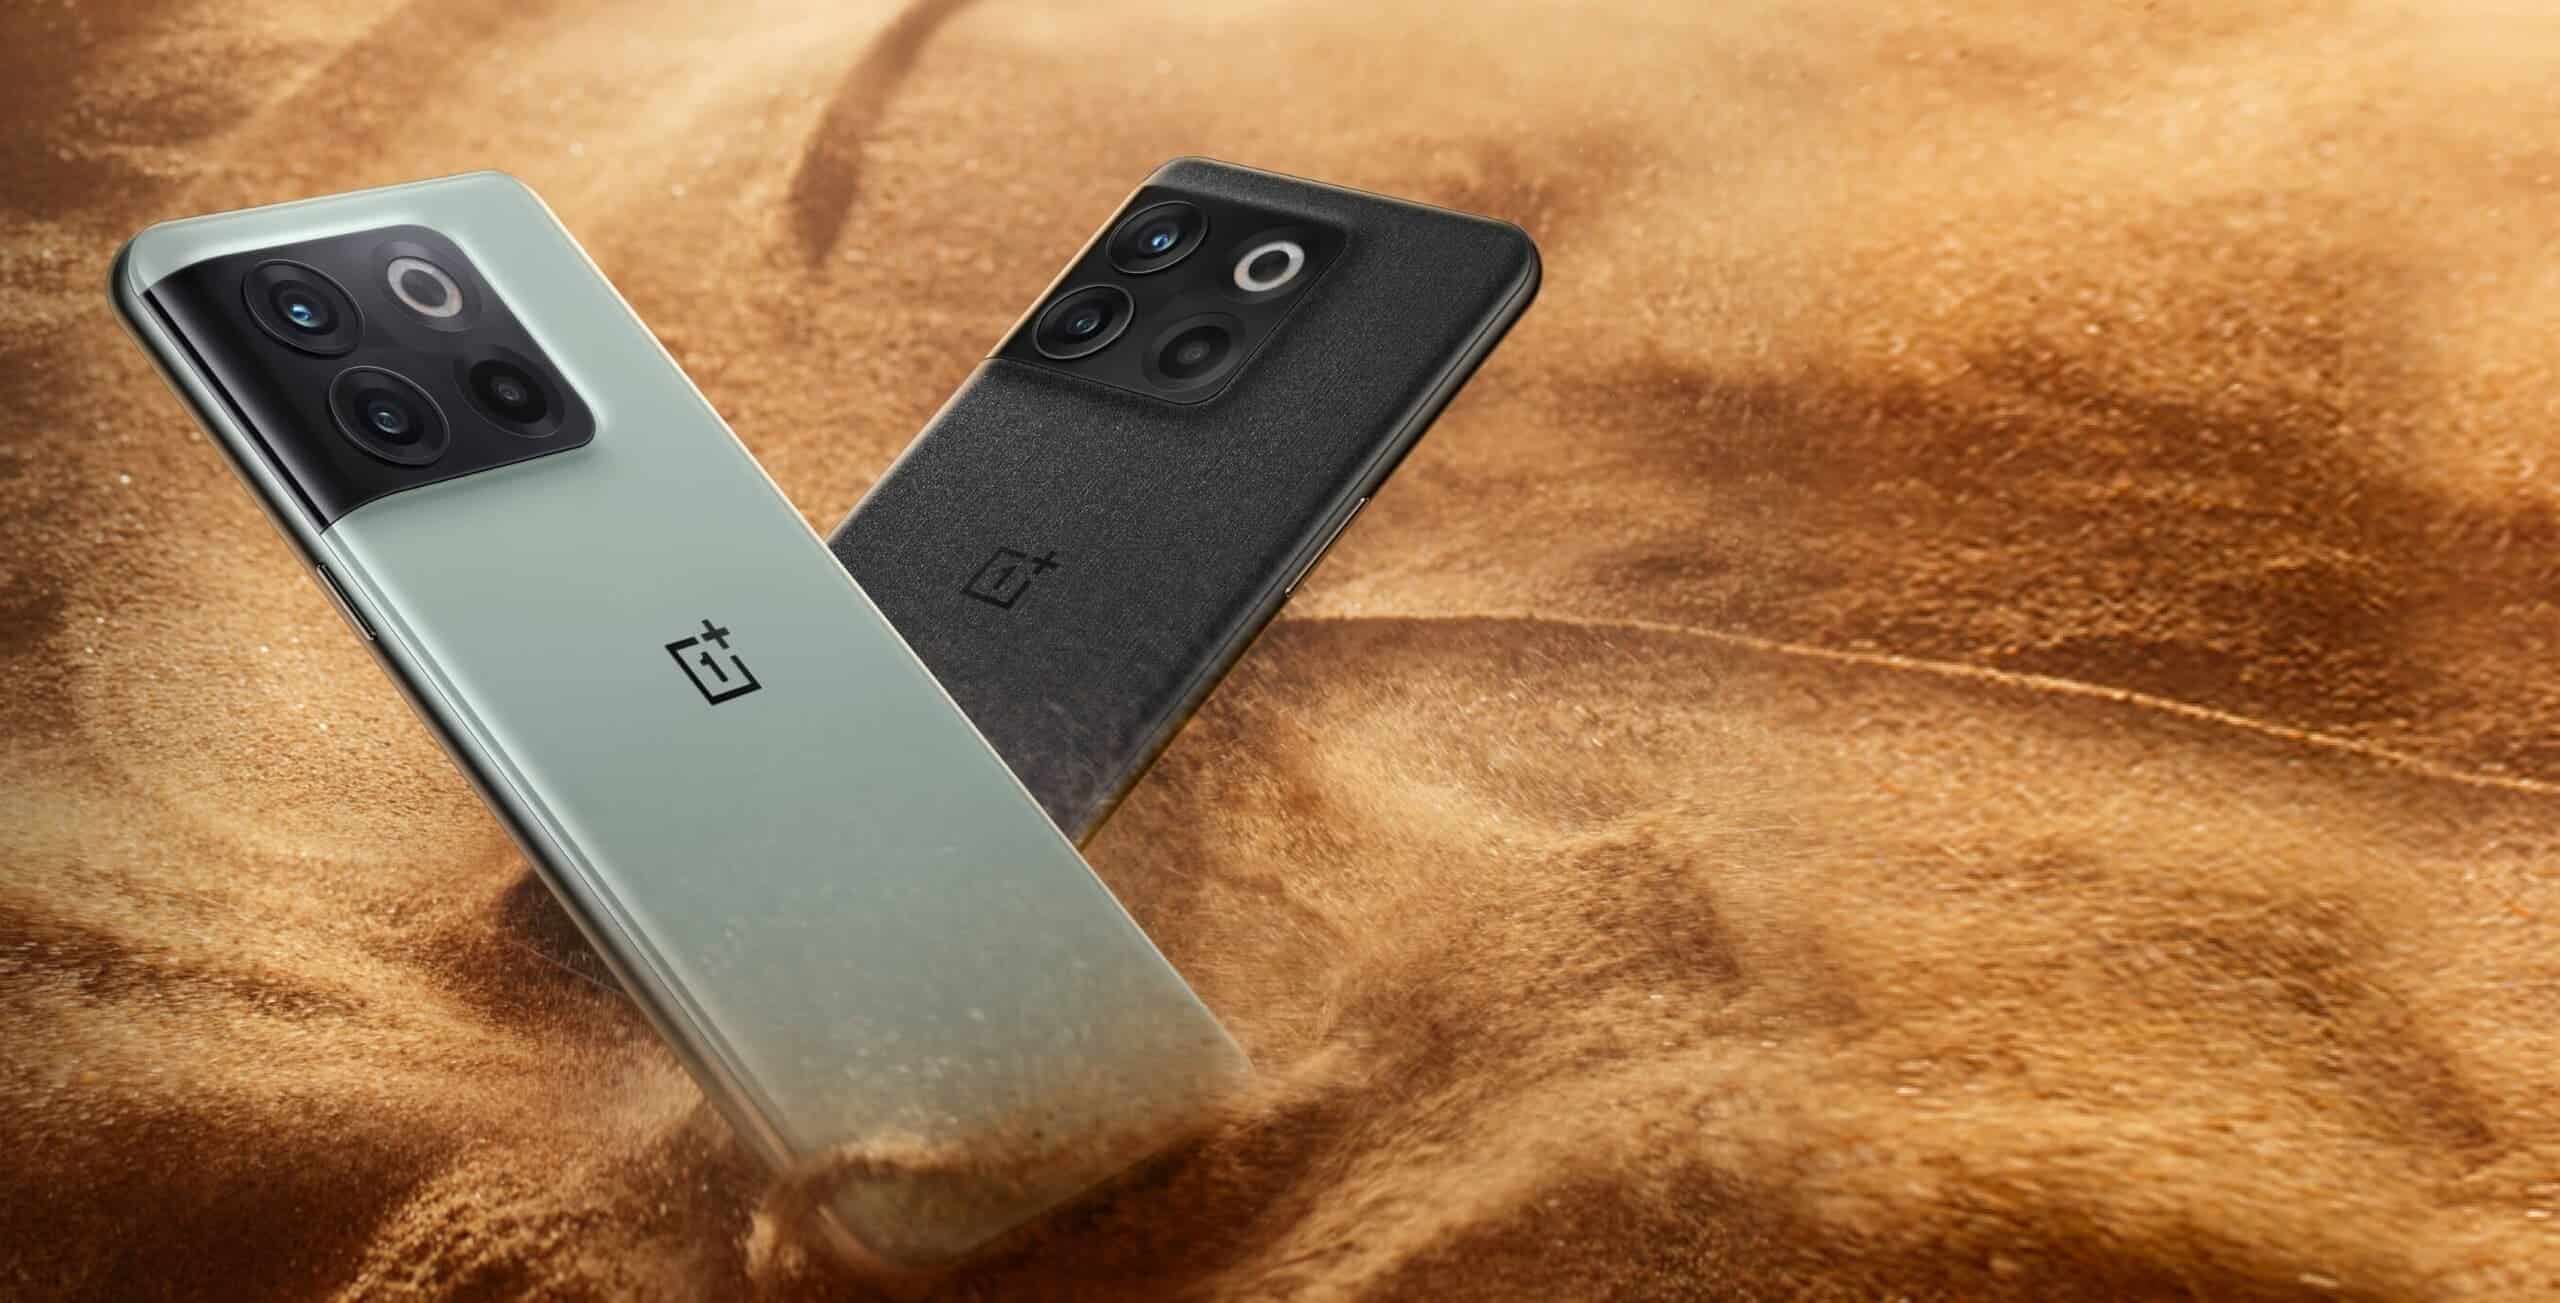 OnePlus Ace Pro Officially Launched, Starting at 3499 yuan ($518)